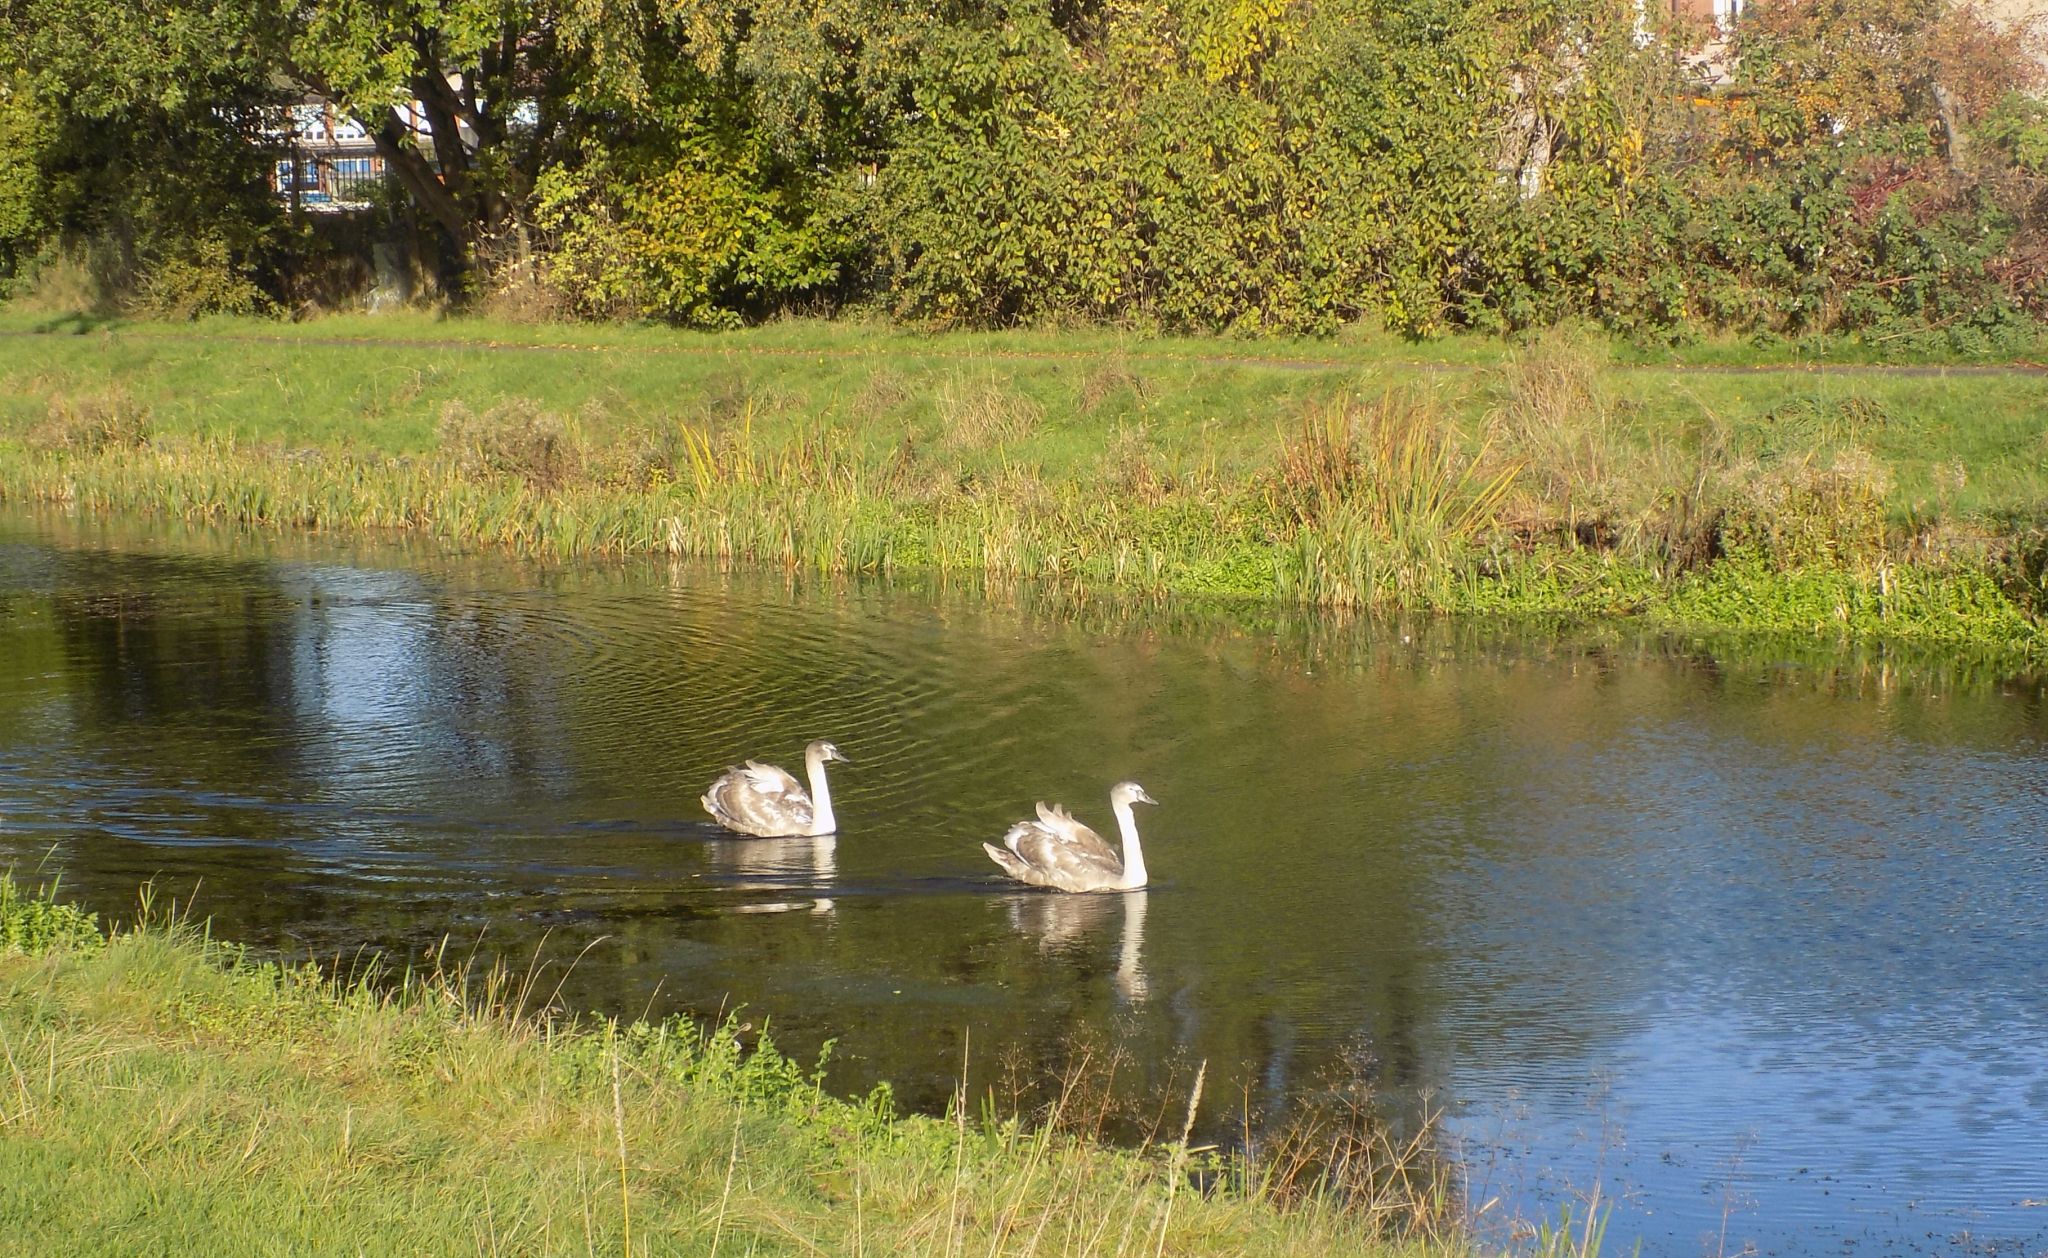 Cygnets on the Forth and Clyde Canal